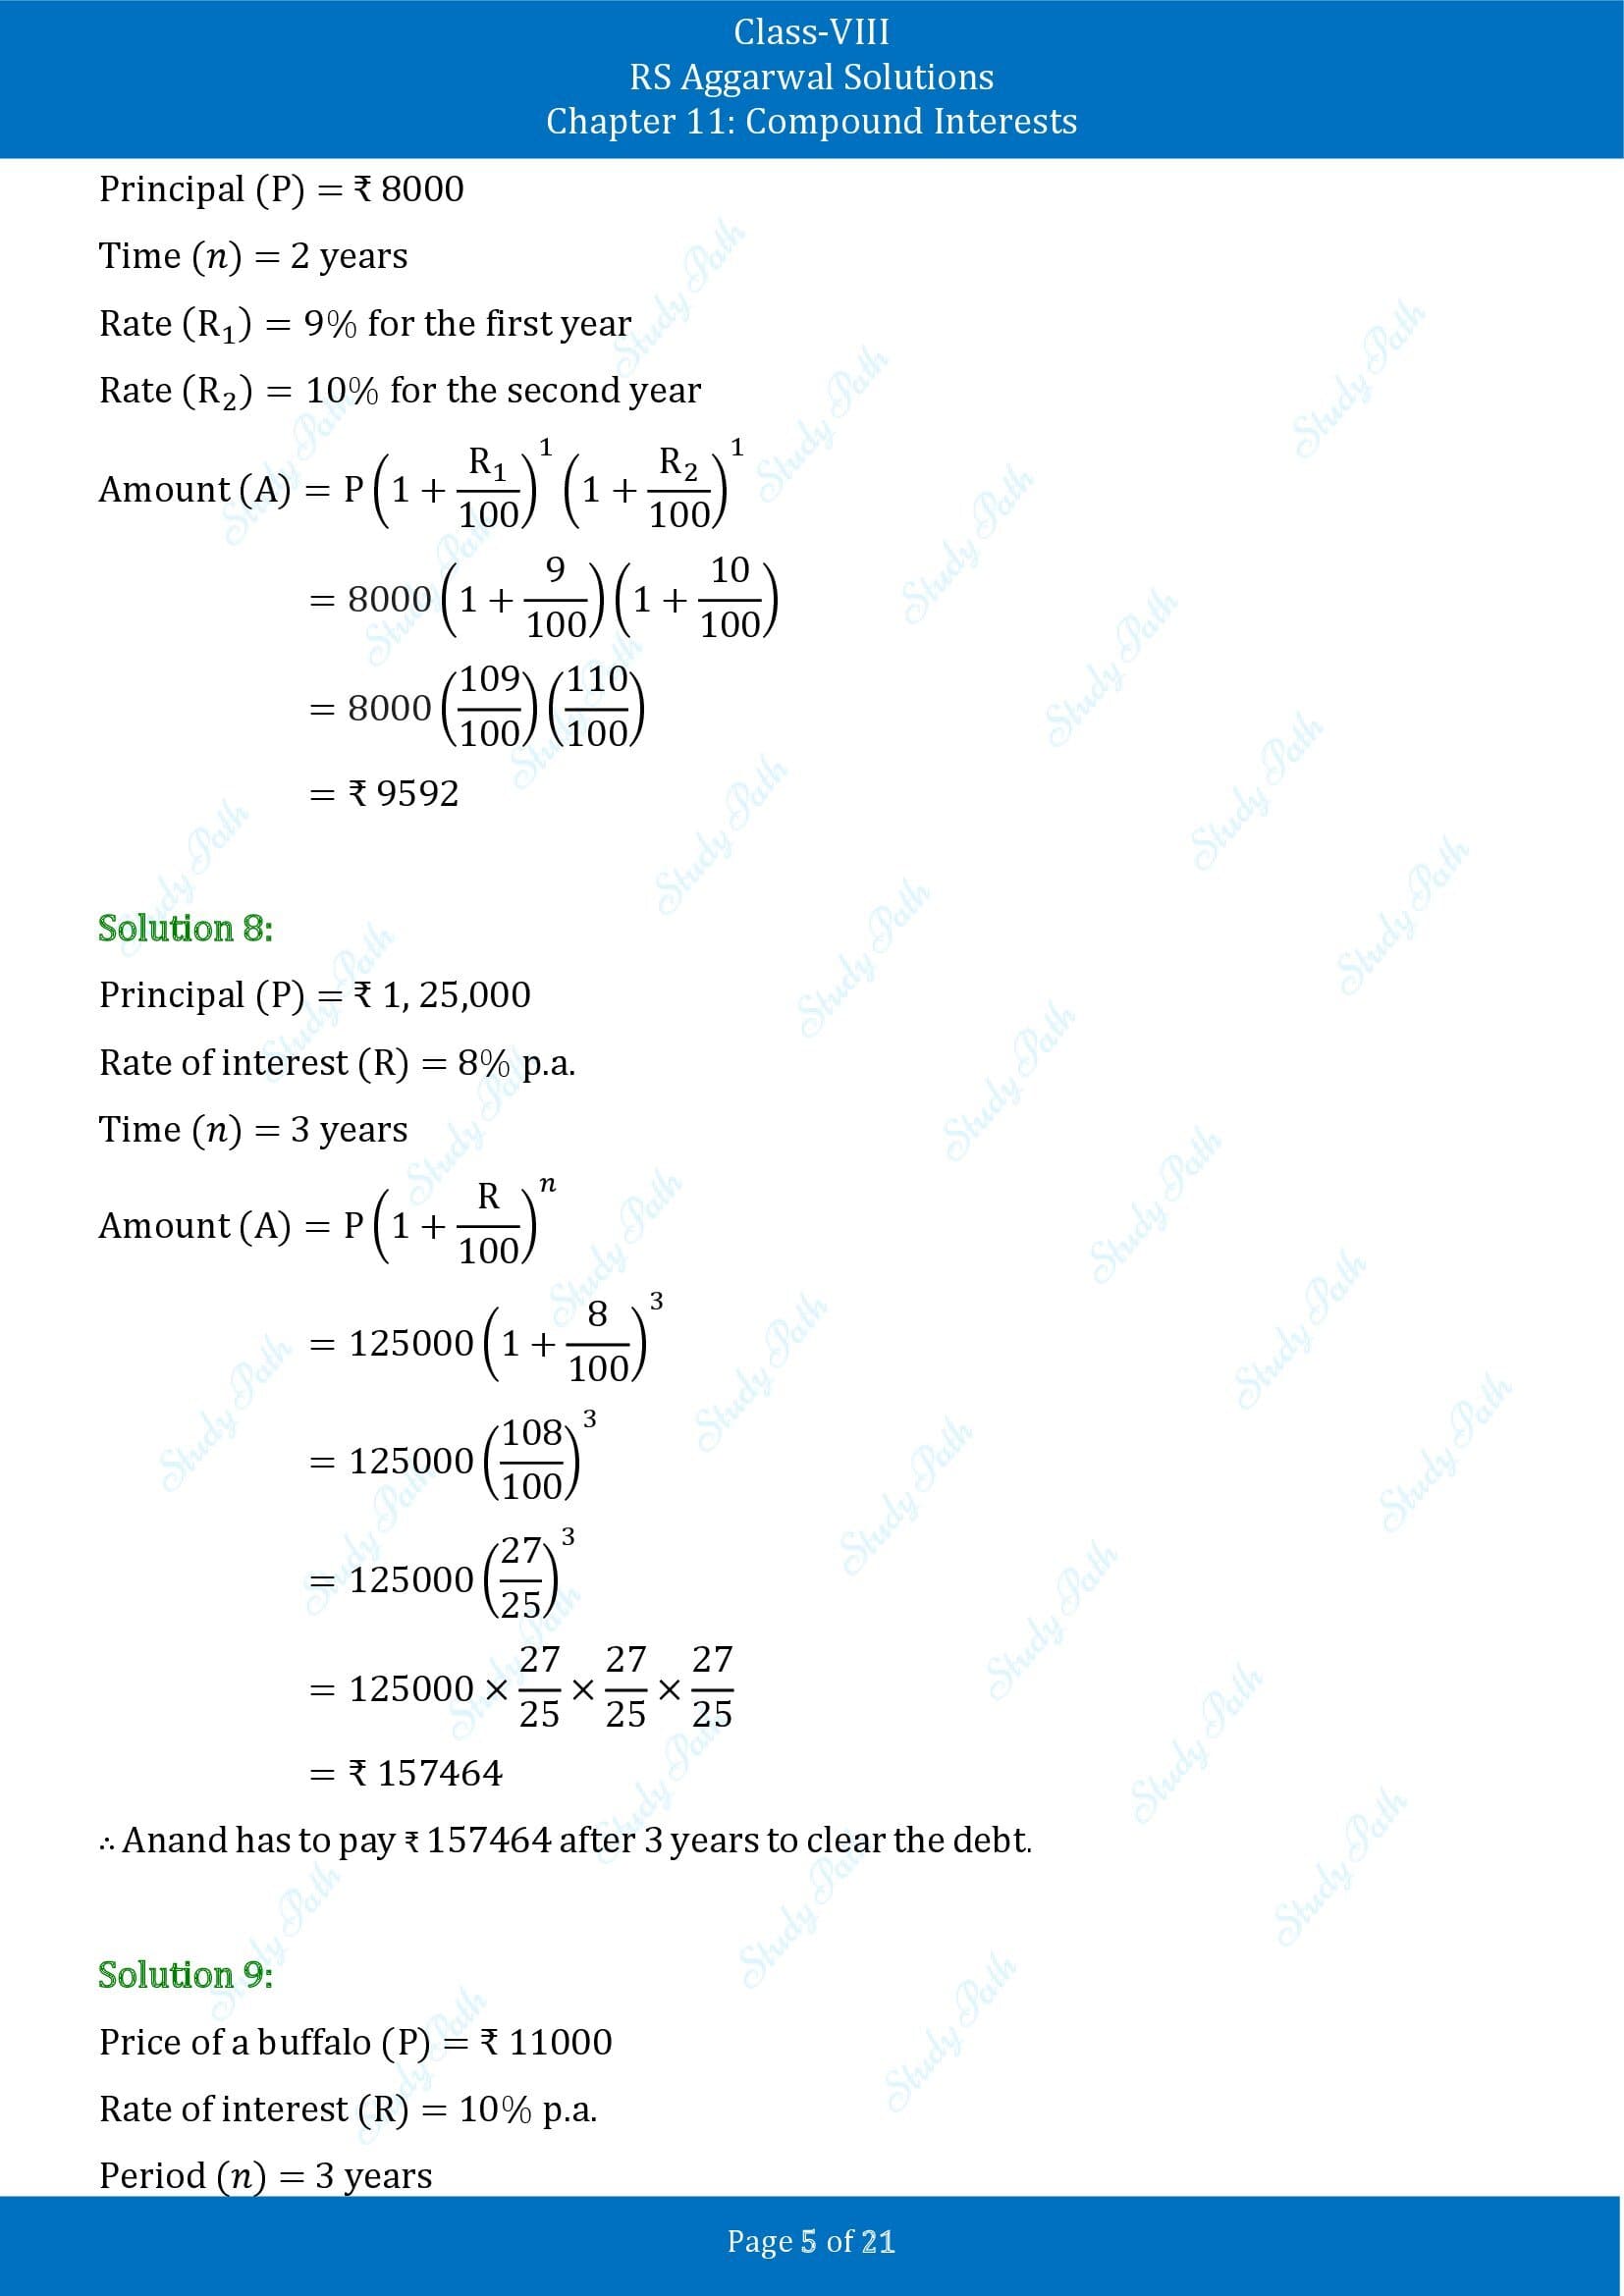 RS Aggarwal Solutions Class 8 Chapter 11 Compound Interests Exercise 11B 00005